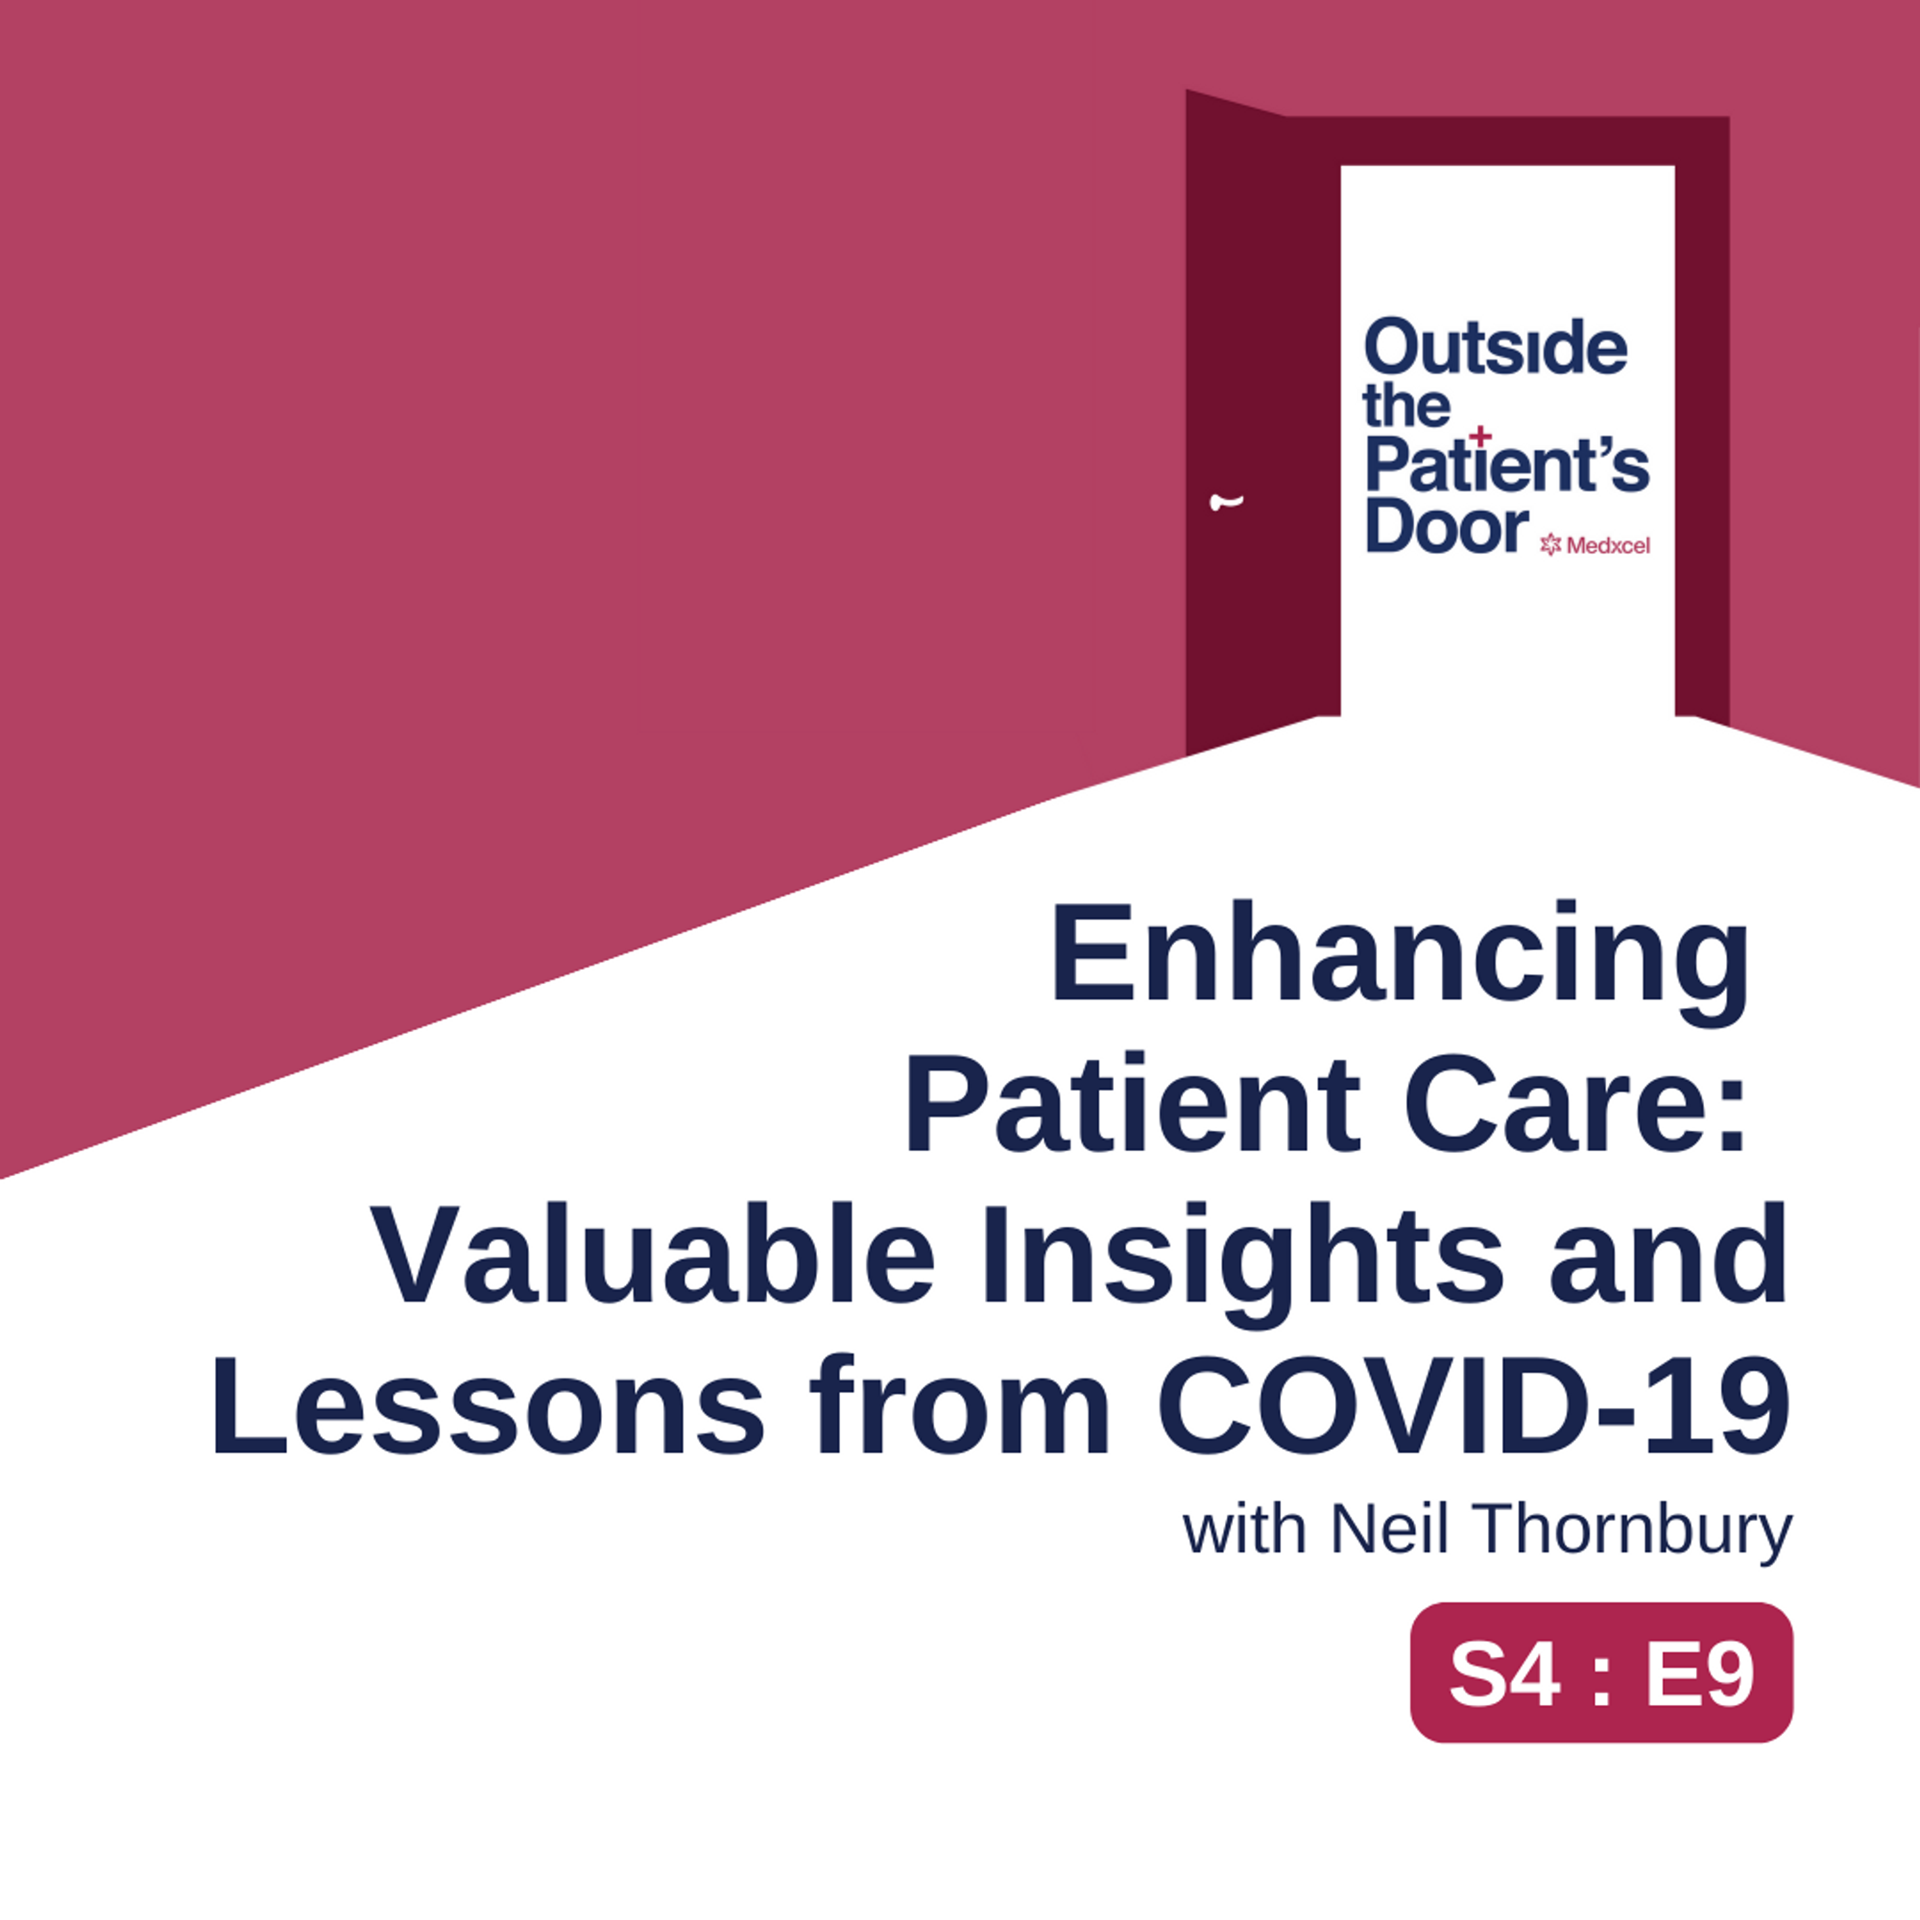 S4 E9: Enhancing Patient Care: Valuable Insights and Lessons from COVID-19 with Neil Thornbury